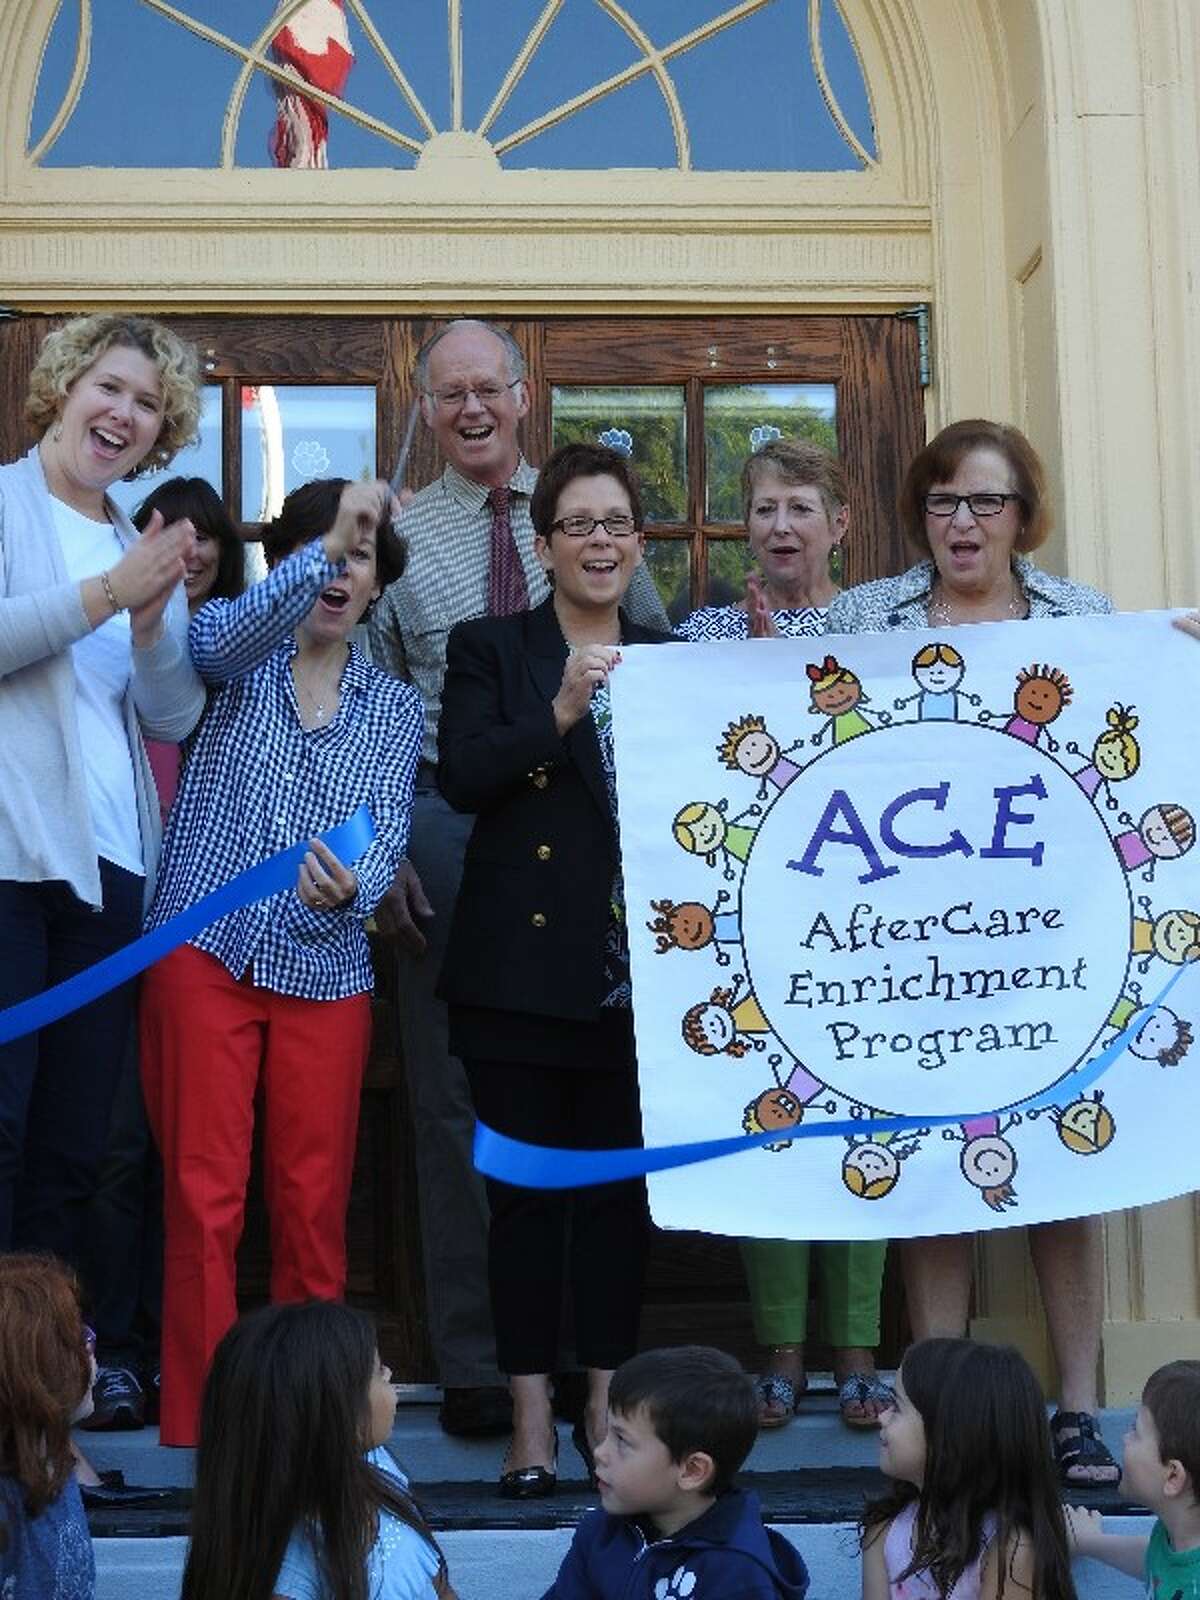 The AfterCare Enrichment Program (ACE) is launched Sept. 18 with L to R: Carolan Dwyer, founder; Brienne Leslie, assistant director; Lanie Flanagan, director; Curtis Read, first selectman; Cathy Colella, principal; Susan Niesobecki, advisory committee; and Pat Cosentino, Superintendent of Schools.